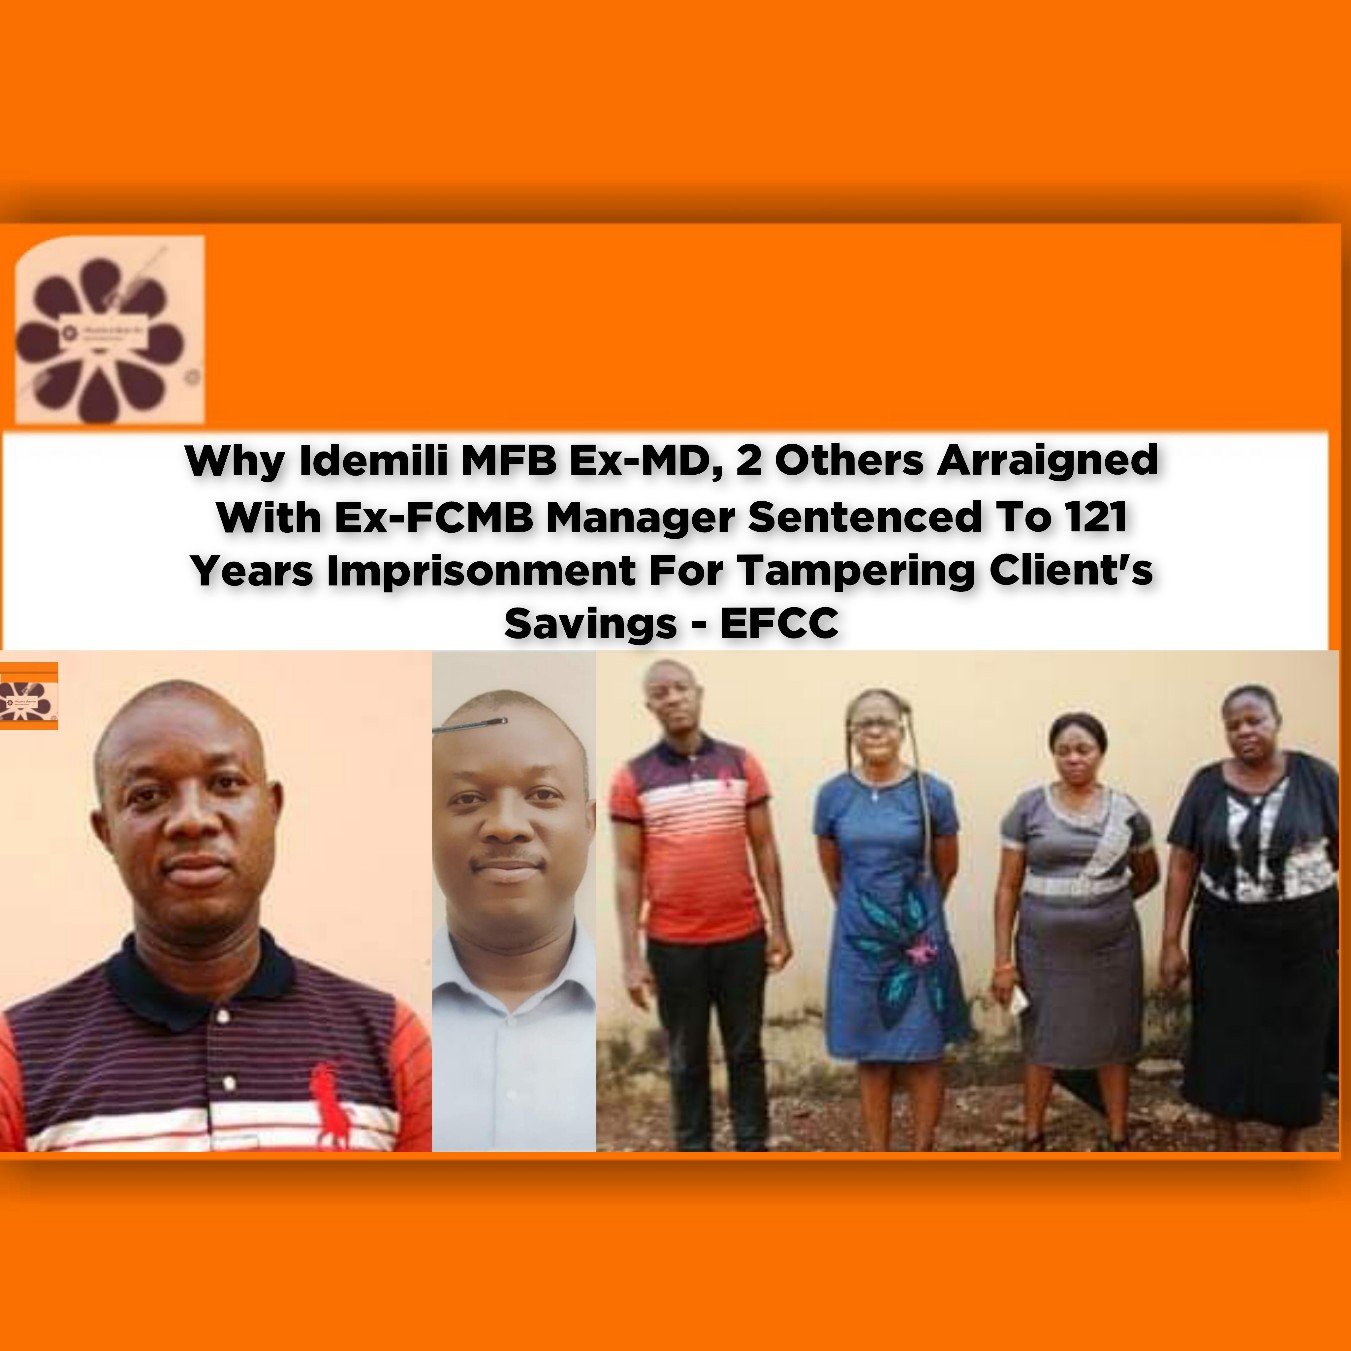 Why Idemili MFB Ex-MD, 2 Others Arraigned With Ex-FCMB Manager Sentenced To 121 Years Imprisonment For Tampering Client's Savings - EFCC ~ OsazuwaAkonedo #NsimaEkere